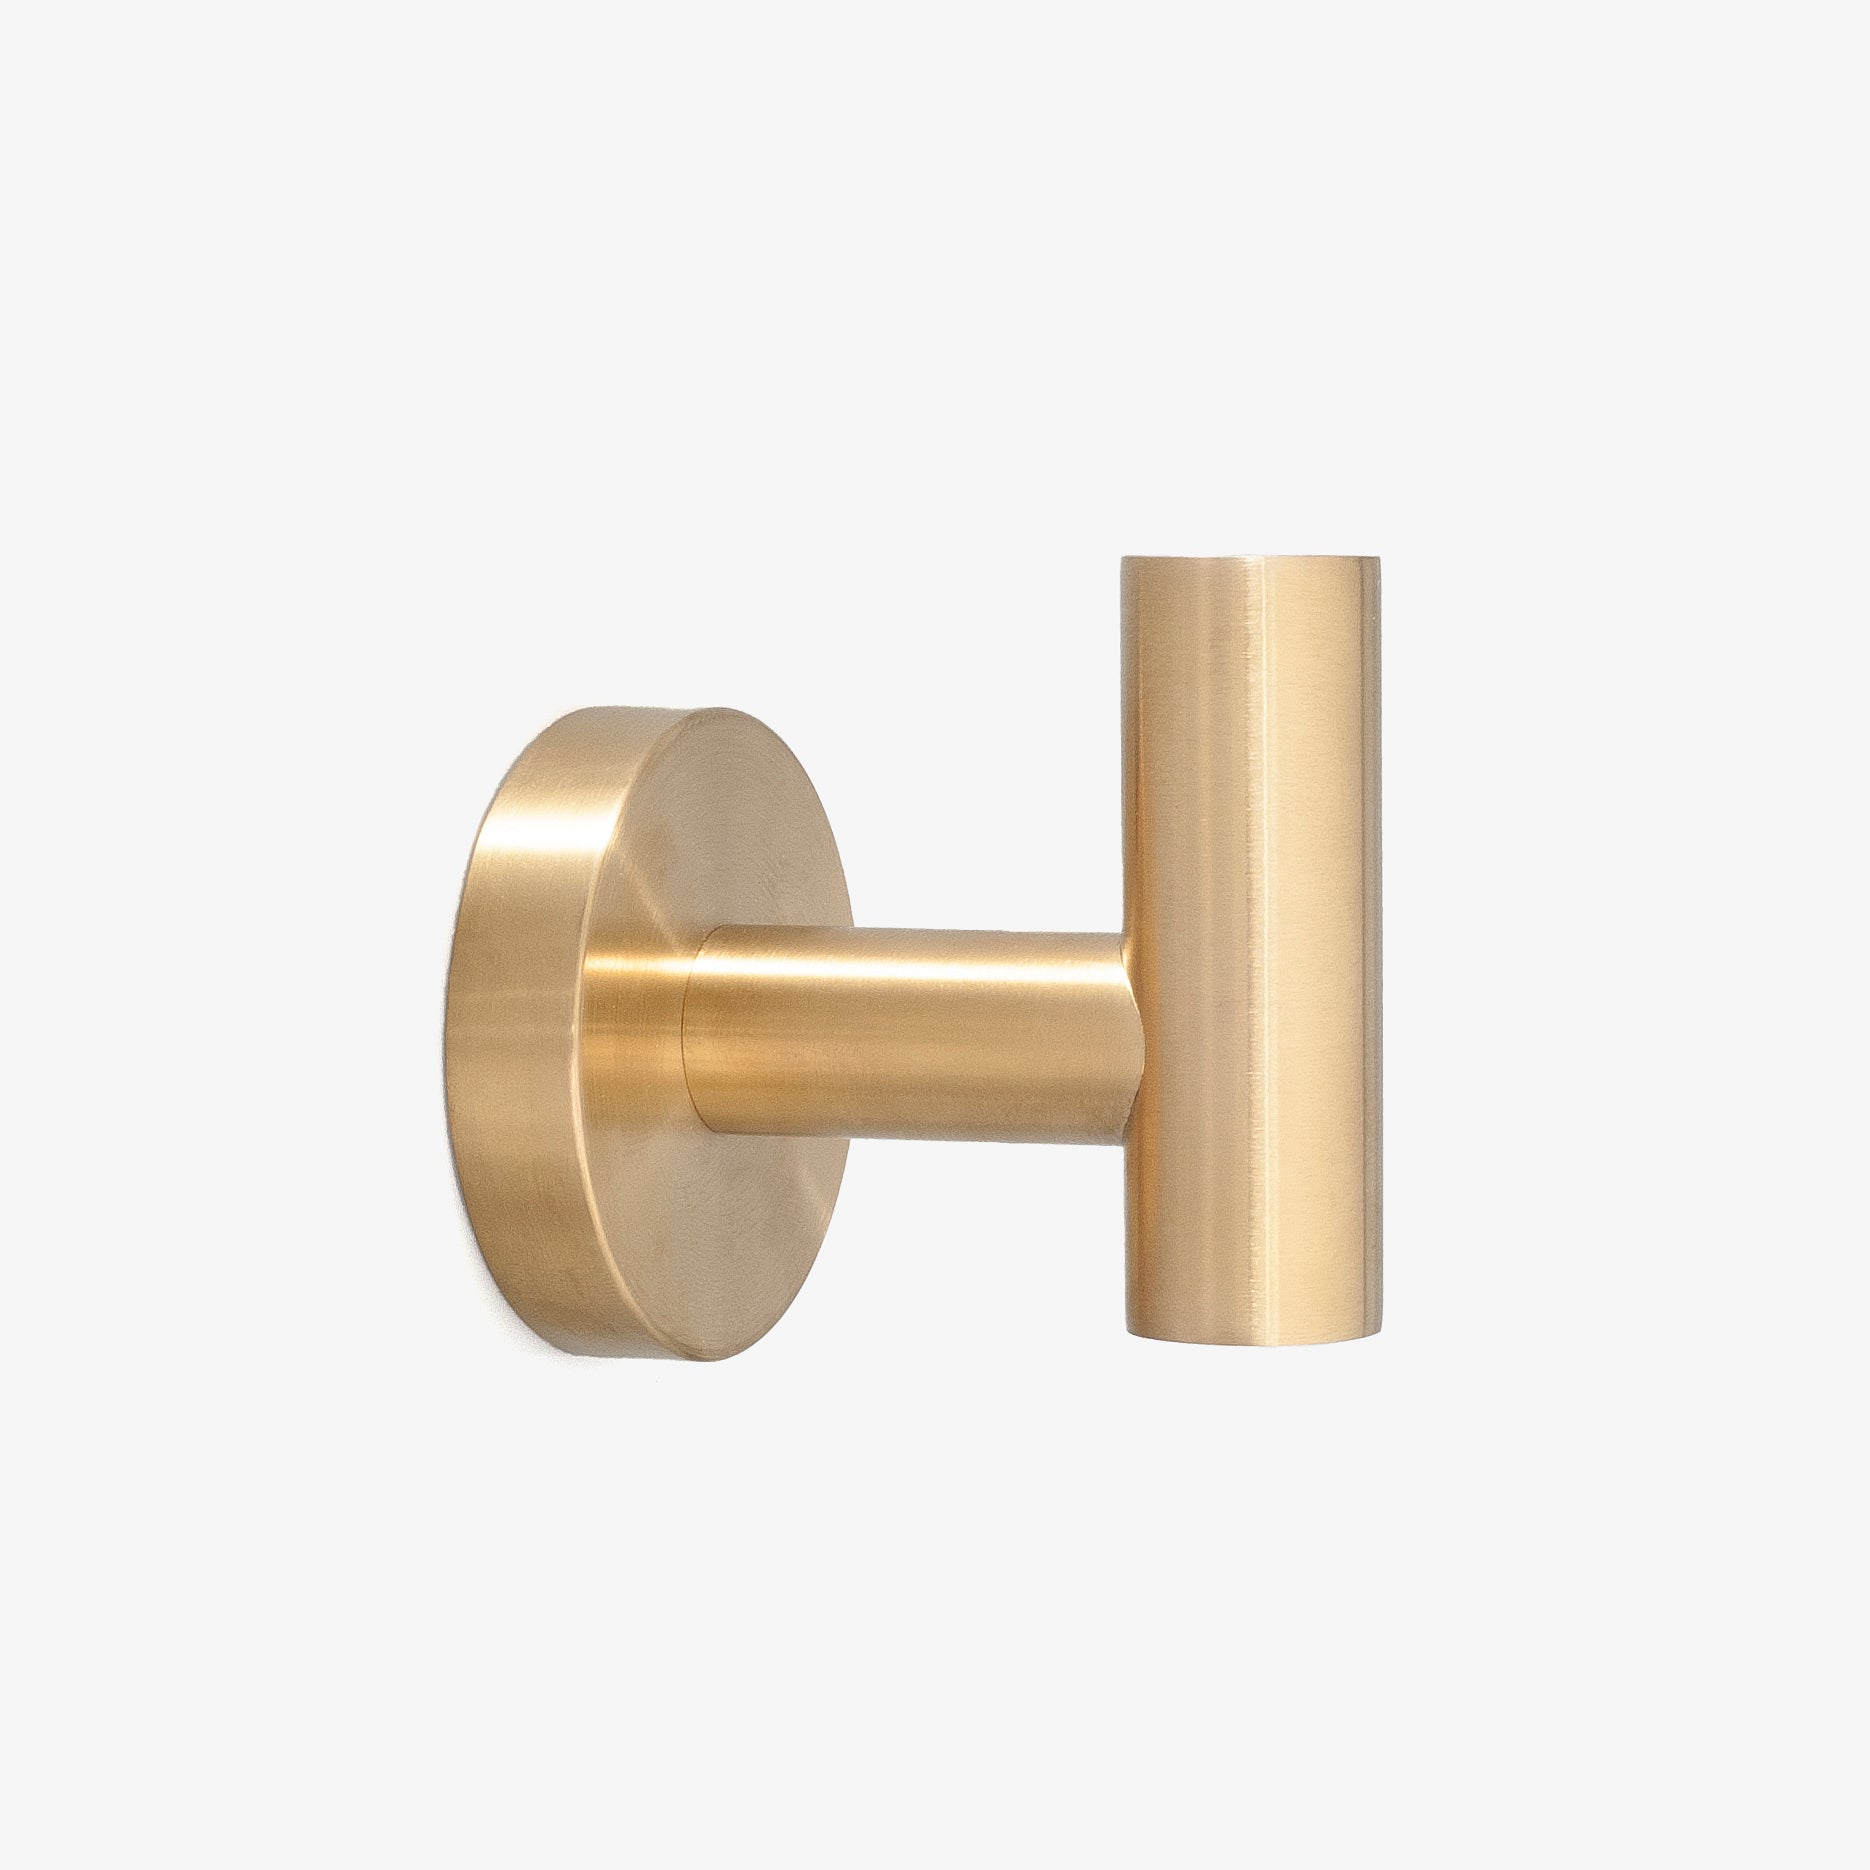 Hitch Stainless Steel Coat Hook Brushed Gold